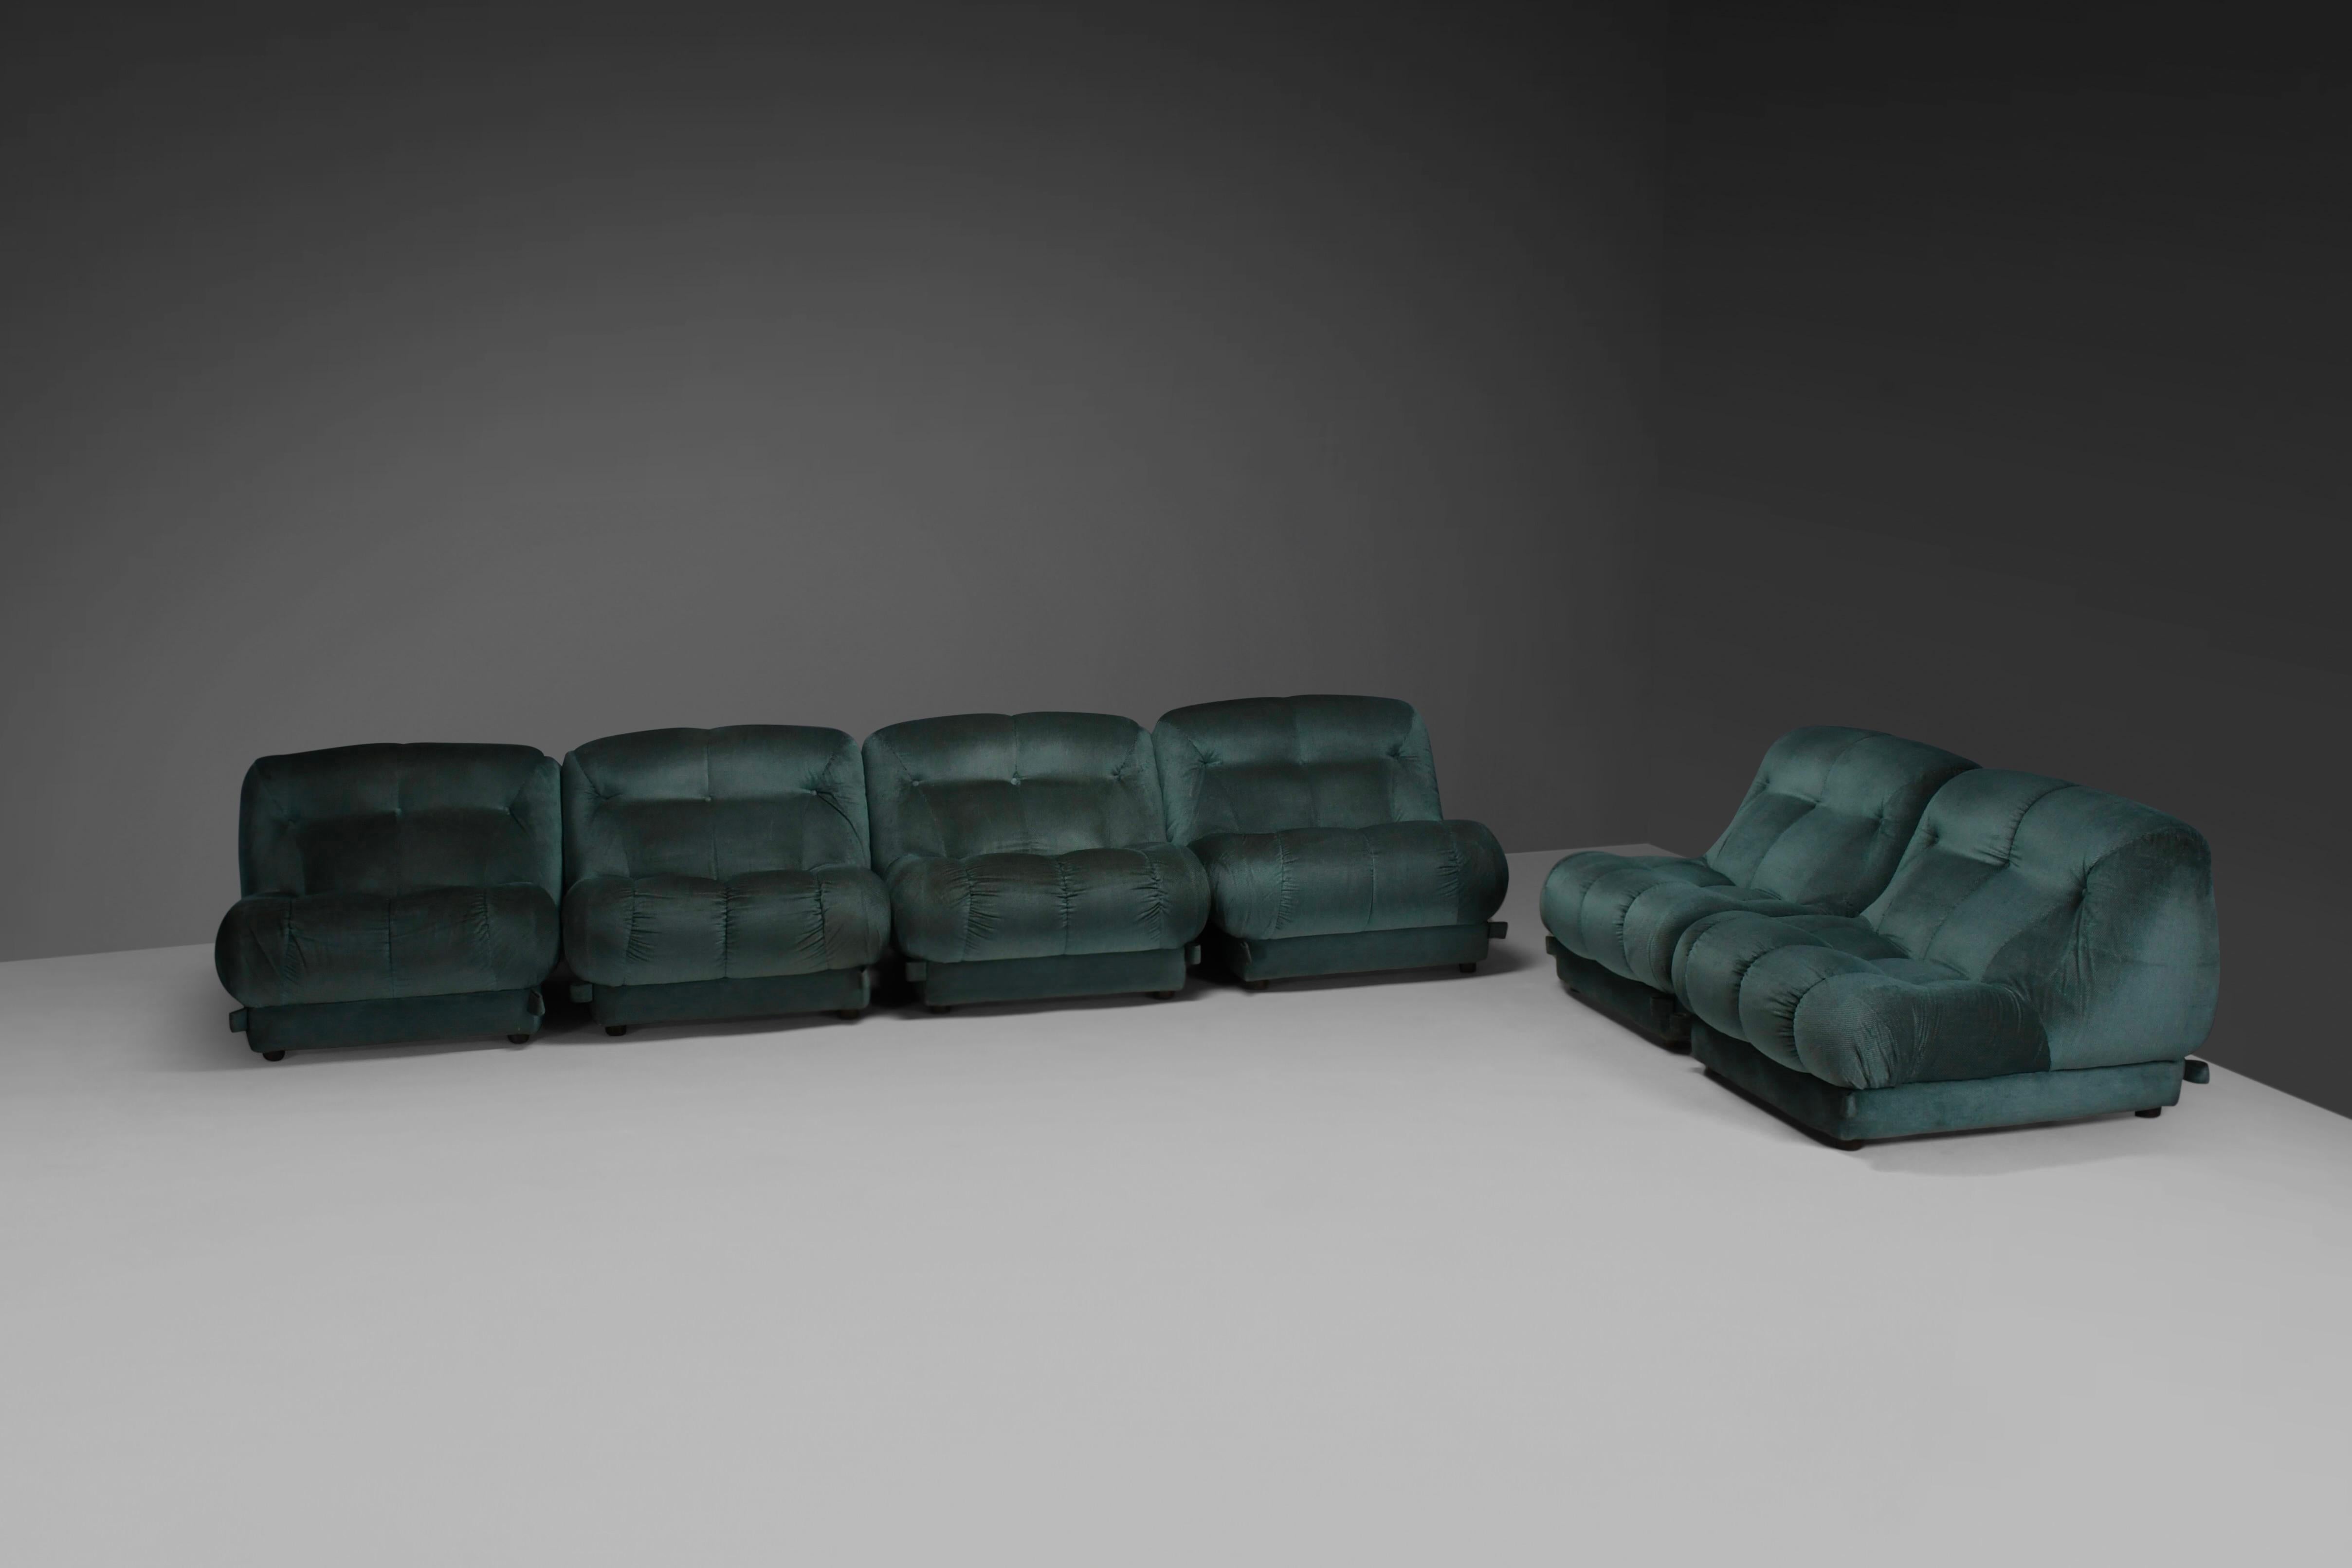 Large Modular Sectional ‘Nuvolone’ Sofa by Rino Maturi in Green Fabric, 1970s For Sale 1